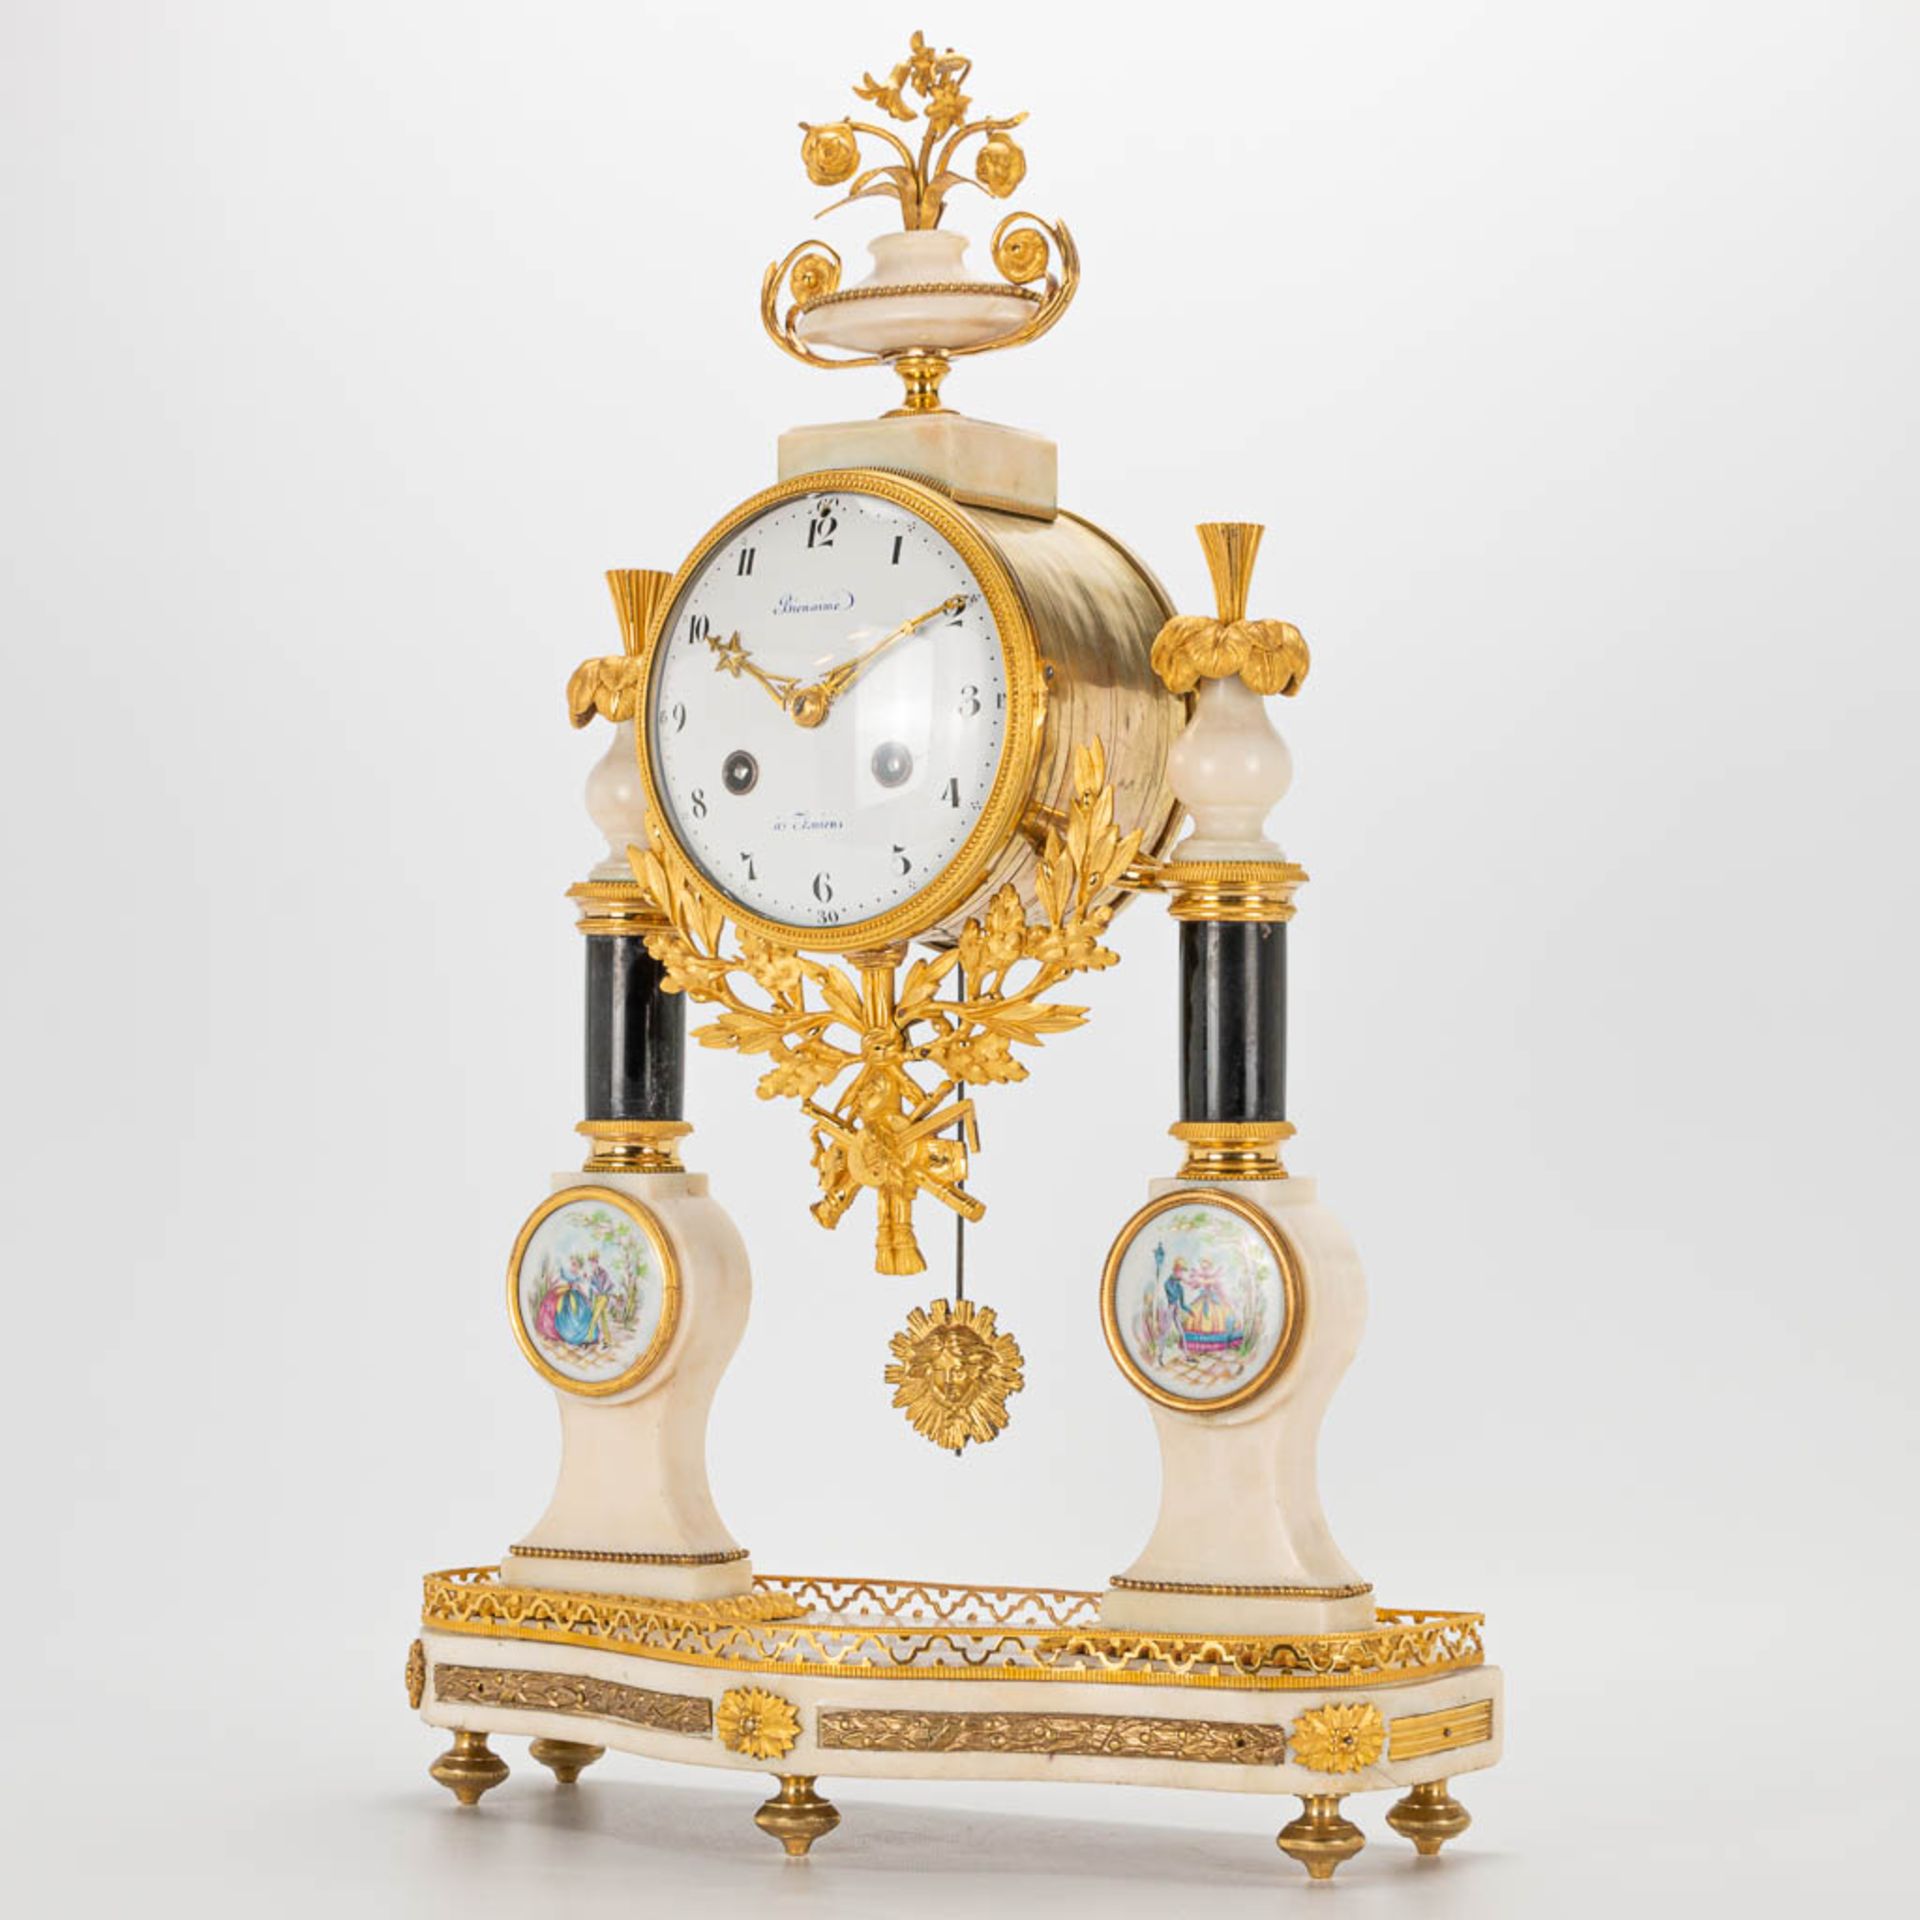 A Louis XVI style column clock made of bronze and marble, with handpainted Limoges plaques and marke - Image 11 of 23